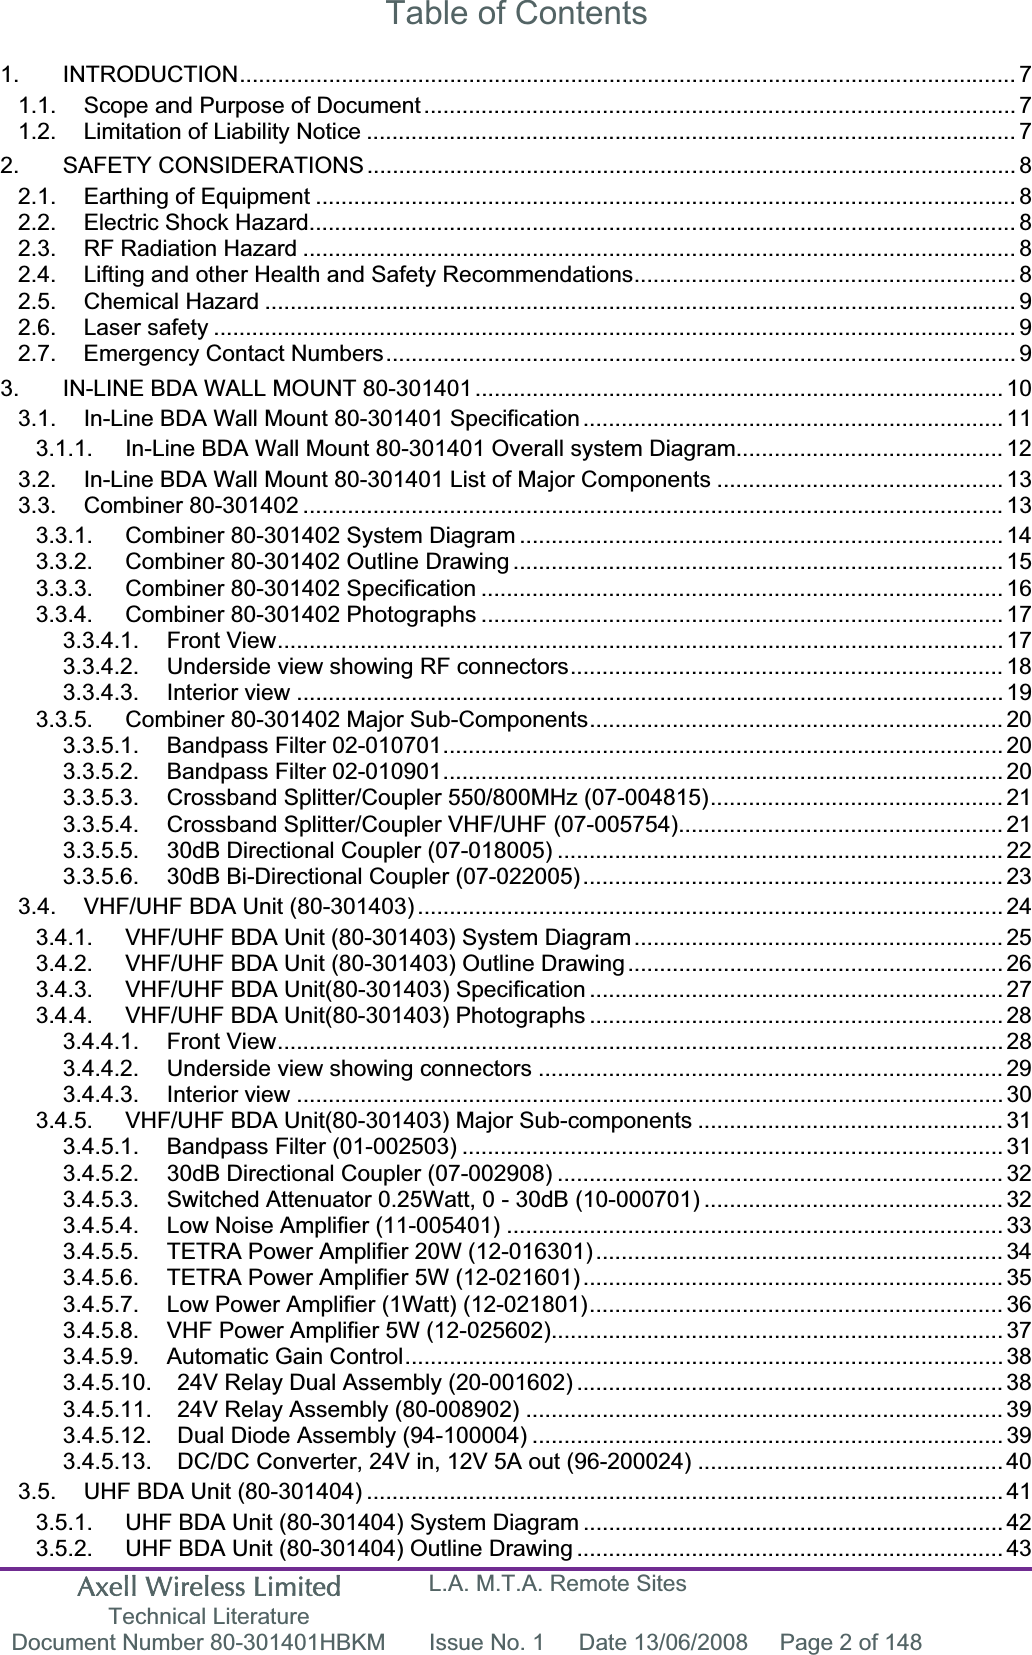 Axell Wireless Limited Technical Literature L.A. M.T.A. Remote Sites Document Number 80-301401HBKM  Issue No. 1  Date 13/06/2008  Page 2 of 148 Table of Contents 1. INTRODUCTION.......................................................................................................................... 71.1. Scope and Purpose of Document............................................................................................. 71.2. Limitation of Liability Notice ...................................................................................................... 72. SAFETY CONSIDERATIONS ...................................................................................................... 82.1. Earthing of Equipment .............................................................................................................. 82.2. Electric Shock Hazard............................................................................................................... 82.3. RF Radiation Hazard ................................................................................................................ 82.4. Lifting and other Health and Safety Recommendations............................................................ 82.5. Chemical Hazard ...................................................................................................................... 92.6. Laser safety .............................................................................................................................. 92.7. Emergency Contact Numbers...................................................................................................93. IN-LINE BDA WALL MOUNT 80-301401................................................................................... 103.1. In-Line BDA Wall Mount 80-301401 Specification.................................................................. 113.1.1. In-Line BDA Wall Mount 80-301401 Overall system Diagram.......................................... 123.2. In-Line BDA Wall Mount 80-301401 List of Major Components ............................................. 133.3. Combiner 80-301402 .............................................................................................................. 133.3.1. Combiner 80-301402 System Diagram ............................................................................ 143.3.2. Combiner 80-301402 Outline Drawing ............................................................................. 153.3.3. Combiner 80-301402 Specification ..................................................................................163.3.4. Combiner 80-301402 Photographs .................................................................................. 173.3.4.1. Front View.................................................................................................................. 173.3.4.2. Underside view showing RF connectors.................................................................... 183.3.4.3. Interior view ............................................................................................................... 193.3.5. Combiner 80-301402 Major Sub-Components................................................................. 203.3.5.1. Bandpass Filter 02-010701........................................................................................ 203.3.5.2. Bandpass Filter 02-010901........................................................................................ 203.3.5.3. Crossband Splitter/Coupler 550/800MHz (07-004815).............................................. 213.3.5.4. Crossband Splitter/Coupler VHF/UHF (07-005754)................................................... 213.3.5.5. 30dB Directional Coupler (07-018005) ...................................................................... 223.3.5.6. 30dB Bi-Directional Coupler (07-022005).................................................................. 233.4. VHF/UHF BDA Unit (80-301403) ............................................................................................ 243.4.1. VHF/UHF BDA Unit (80-301403) System Diagram.......................................................... 253.4.2. VHF/UHF BDA Unit (80-301403) Outline Drawing........................................................... 263.4.3. VHF/UHF BDA Unit(80-301403) Specification ................................................................. 273.4.4. VHF/UHF BDA Unit(80-301403) Photographs ................................................................. 283.4.4.1. Front View.................................................................................................................. 283.4.4.2. Underside view showing connectors ......................................................................... 293.4.4.3. Interior view ............................................................................................................... 303.4.5. VHF/UHF BDA Unit(80-301403) Major Sub-components ................................................ 313.4.5.1. Bandpass Filter (01-002503) ..................................................................................... 313.4.5.2. 30dB Directional Coupler (07-002908) ...................................................................... 323.4.5.3. Switched Attenuator 0.25Watt, 0 - 30dB (10-000701) ............................................... 323.4.5.4. Low Noise Amplifier (11-005401) .............................................................................. 333.4.5.5. TETRA Power Amplifier 20W (12-016301) ................................................................ 343.4.5.6. TETRA Power Amplifier 5W (12-021601) .................................................................. 353.4.5.7. Low Power Amplifier (1Watt) (12-021801)................................................................. 363.4.5.8. VHF Power Amplifier 5W (12-025602)....................................................................... 373.4.5.9. Automatic Gain Control.............................................................................................. 383.4.5.10. 24V Relay Dual Assembly (20-001602) ................................................................... 383.4.5.11. 24V Relay Assembly (80-008902) ........................................................................... 393.4.5.12. Dual Diode Assembly (94-100004) .......................................................................... 393.4.5.13. DC/DC Converter, 24V in, 12V 5A out (96-200024) ................................................ 403.5. UHF BDA Unit (80-301404) ....................................................................................................413.5.1. UHF BDA Unit (80-301404) System Diagram .................................................................. 423.5.2. UHF BDA Unit (80-301404) Outline Drawing ................................................................... 43